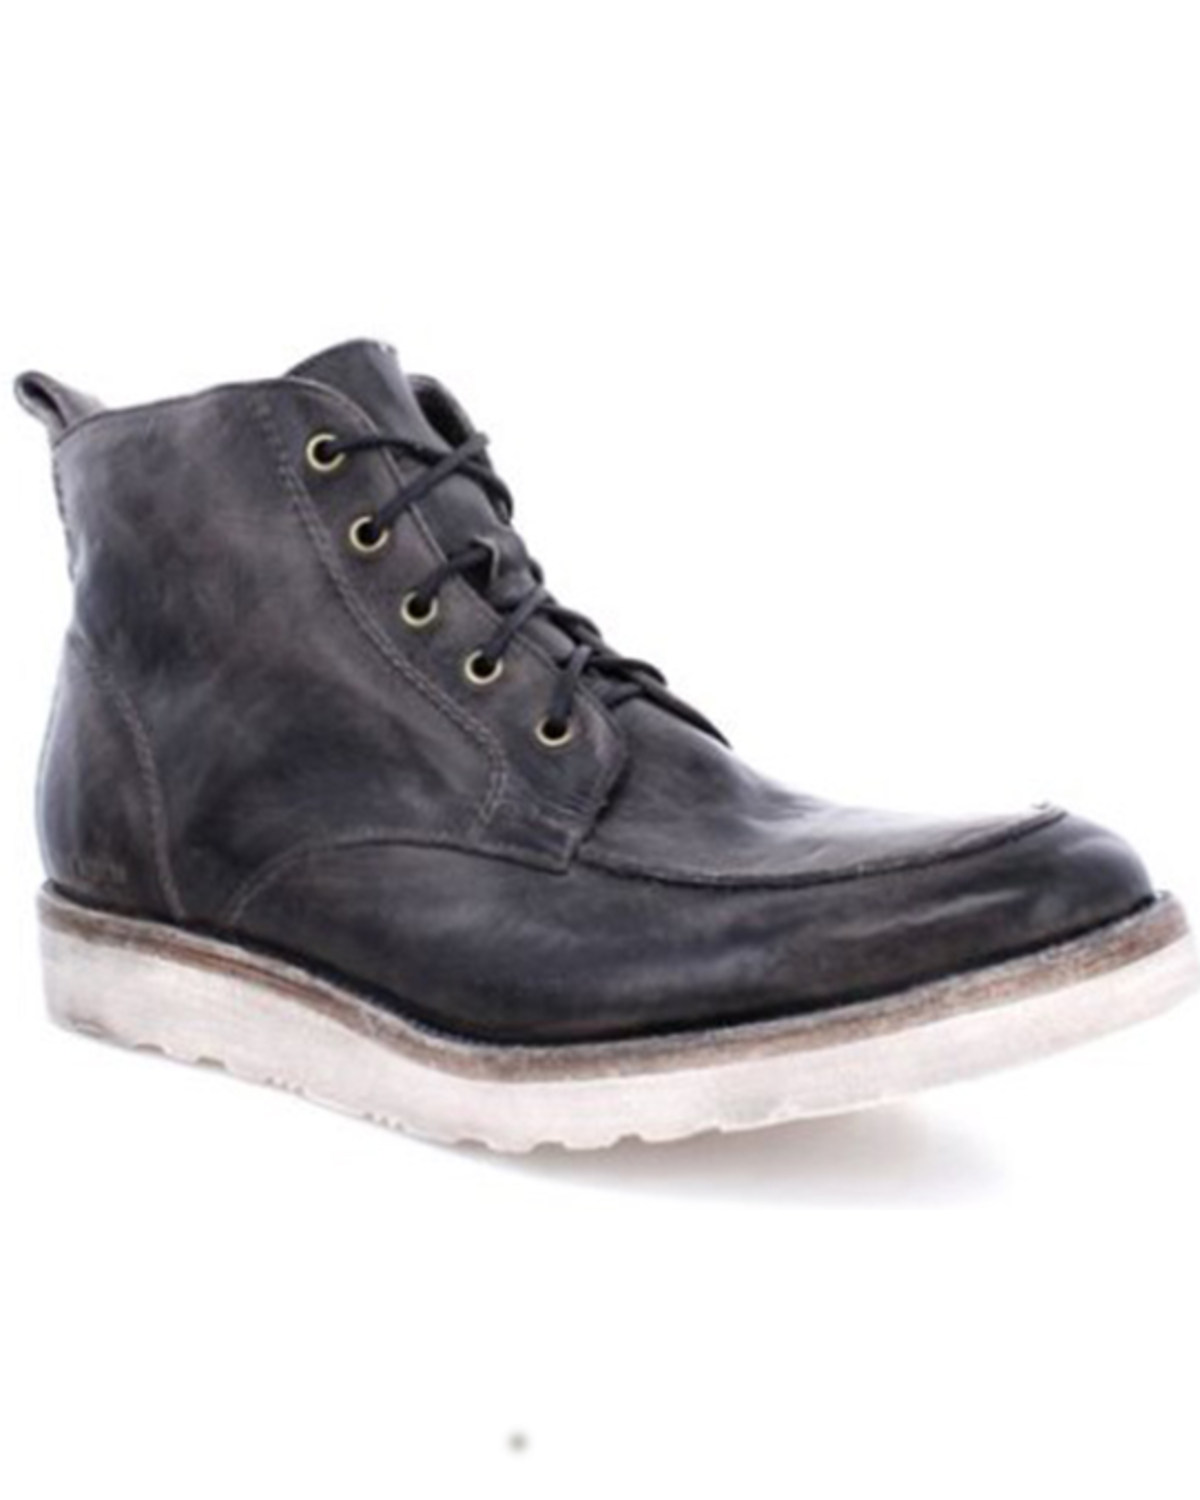 Bed Stu Men's Lincoln Western Casual Boots - Round Toe